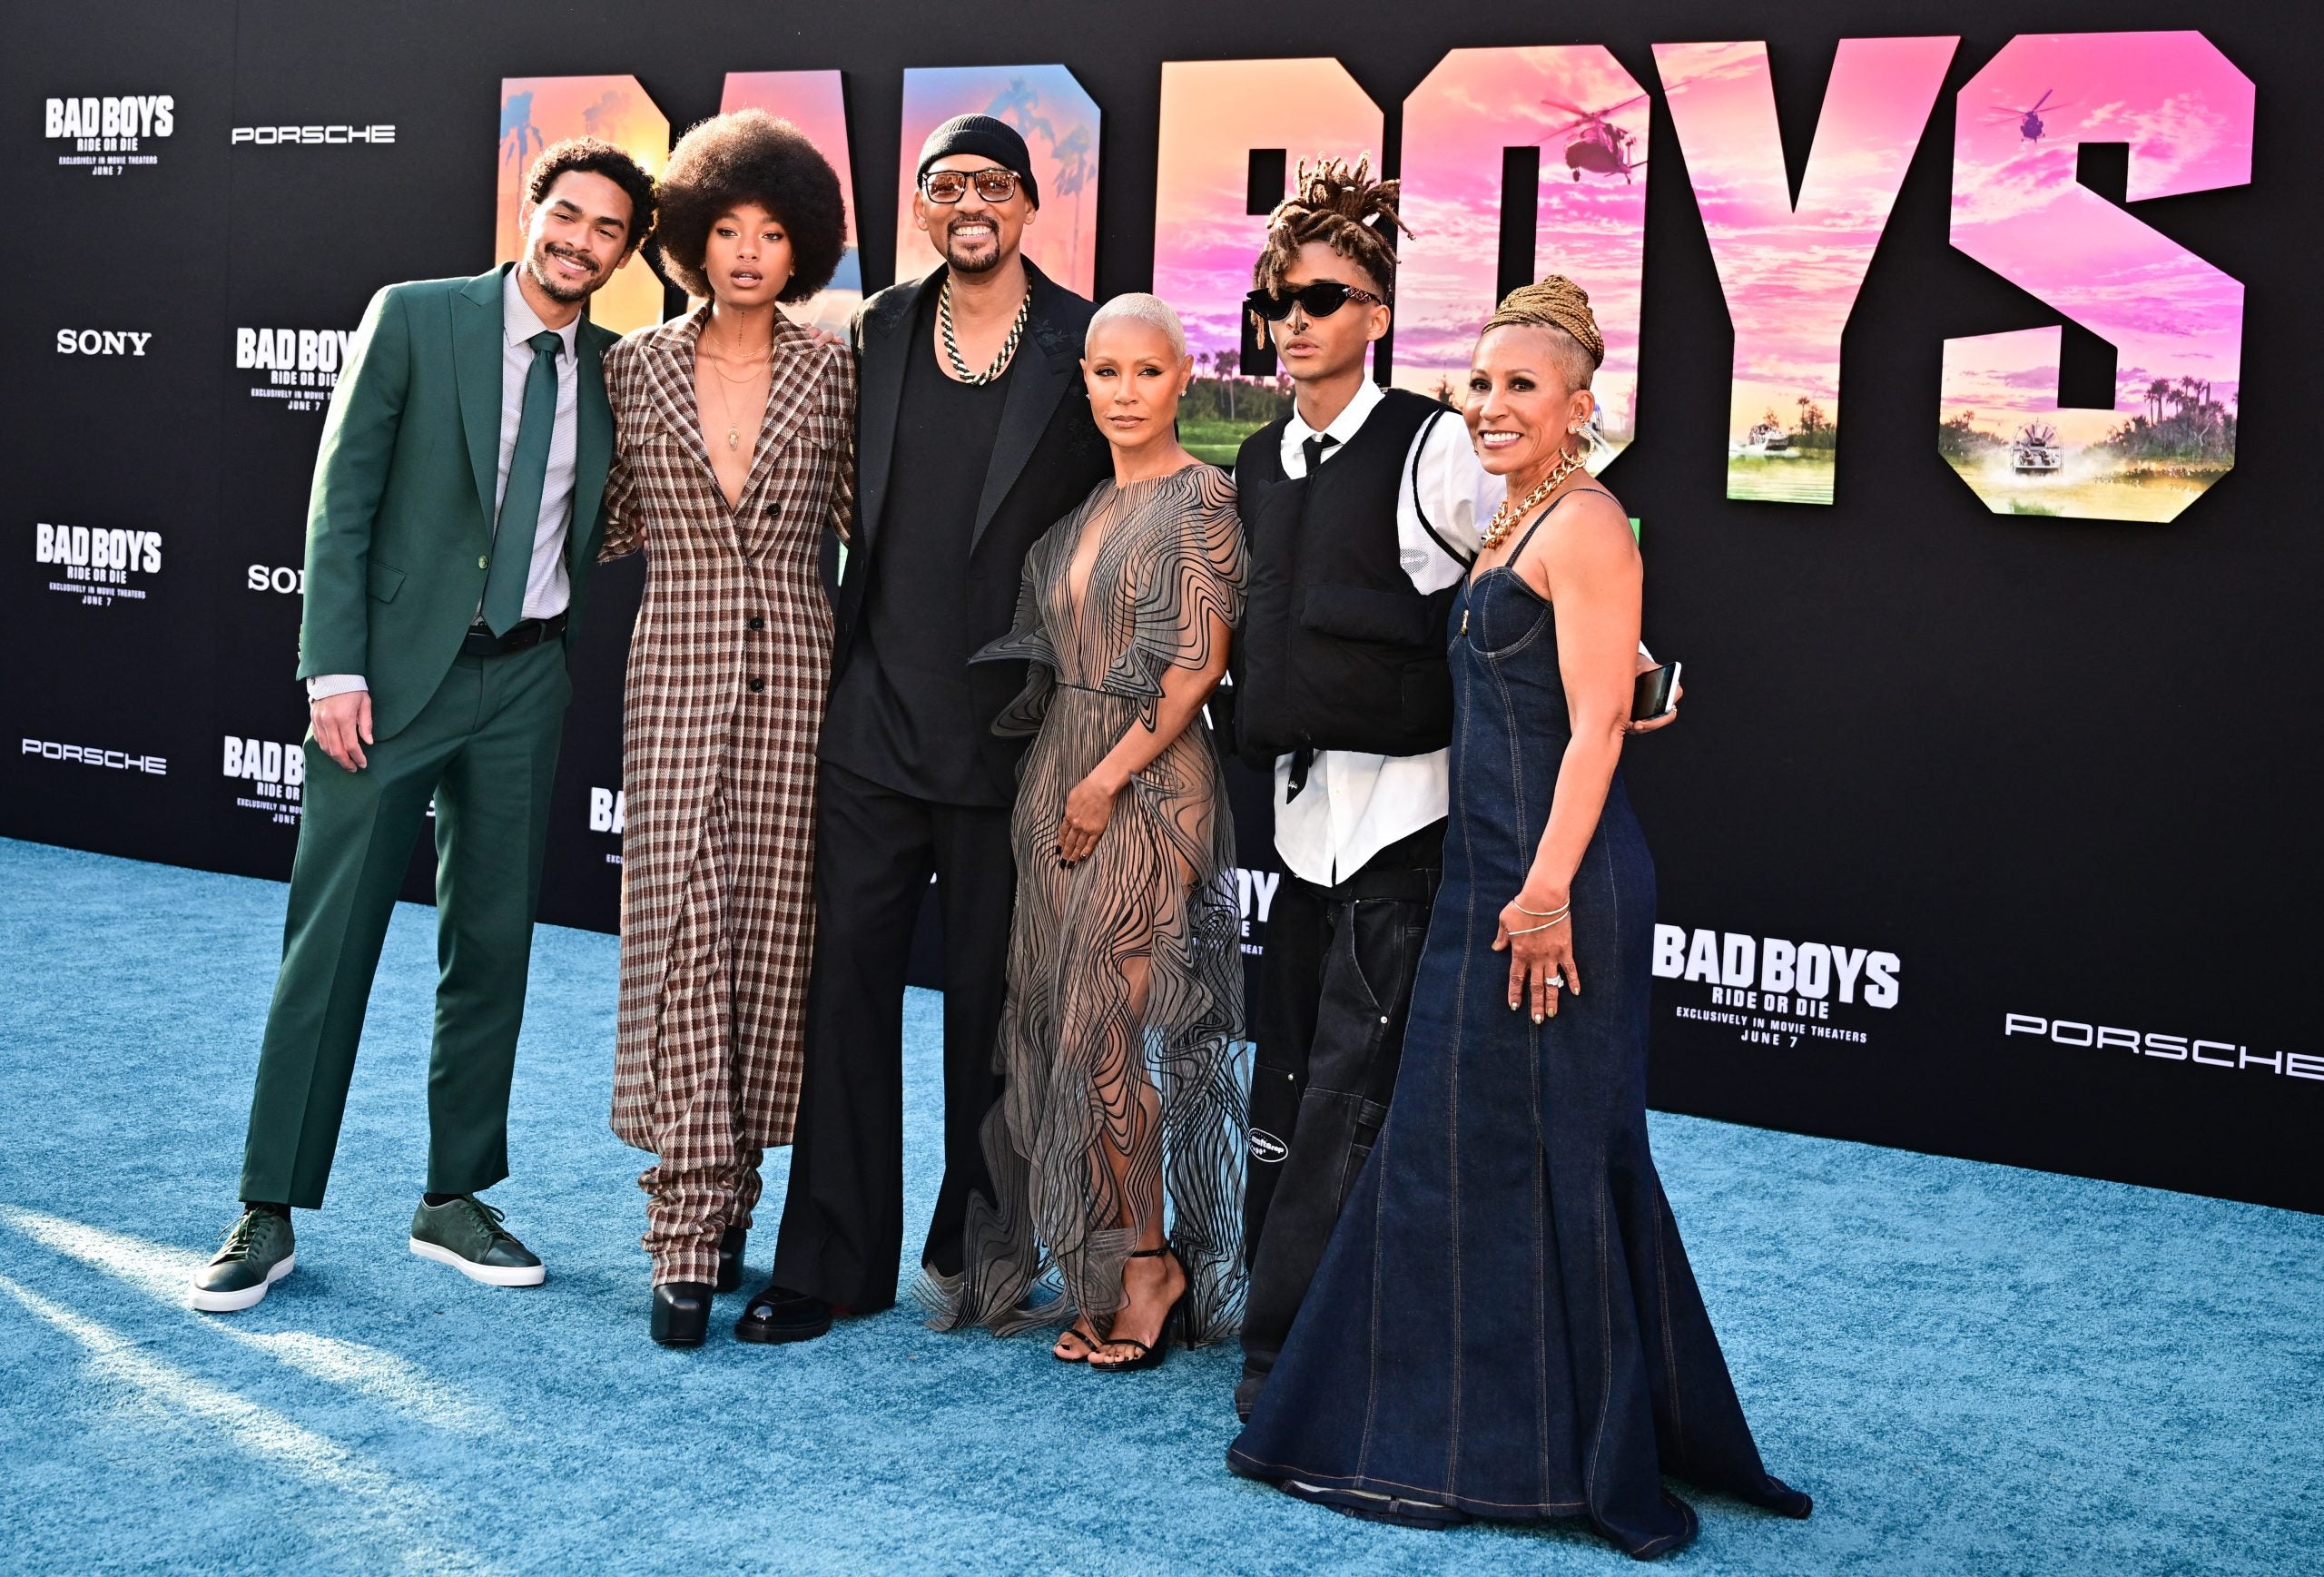 The Smiths Stun At The ‘Bad Boys’ Premiere: 12 Times They Slayed On The Red Carpet As A Family 